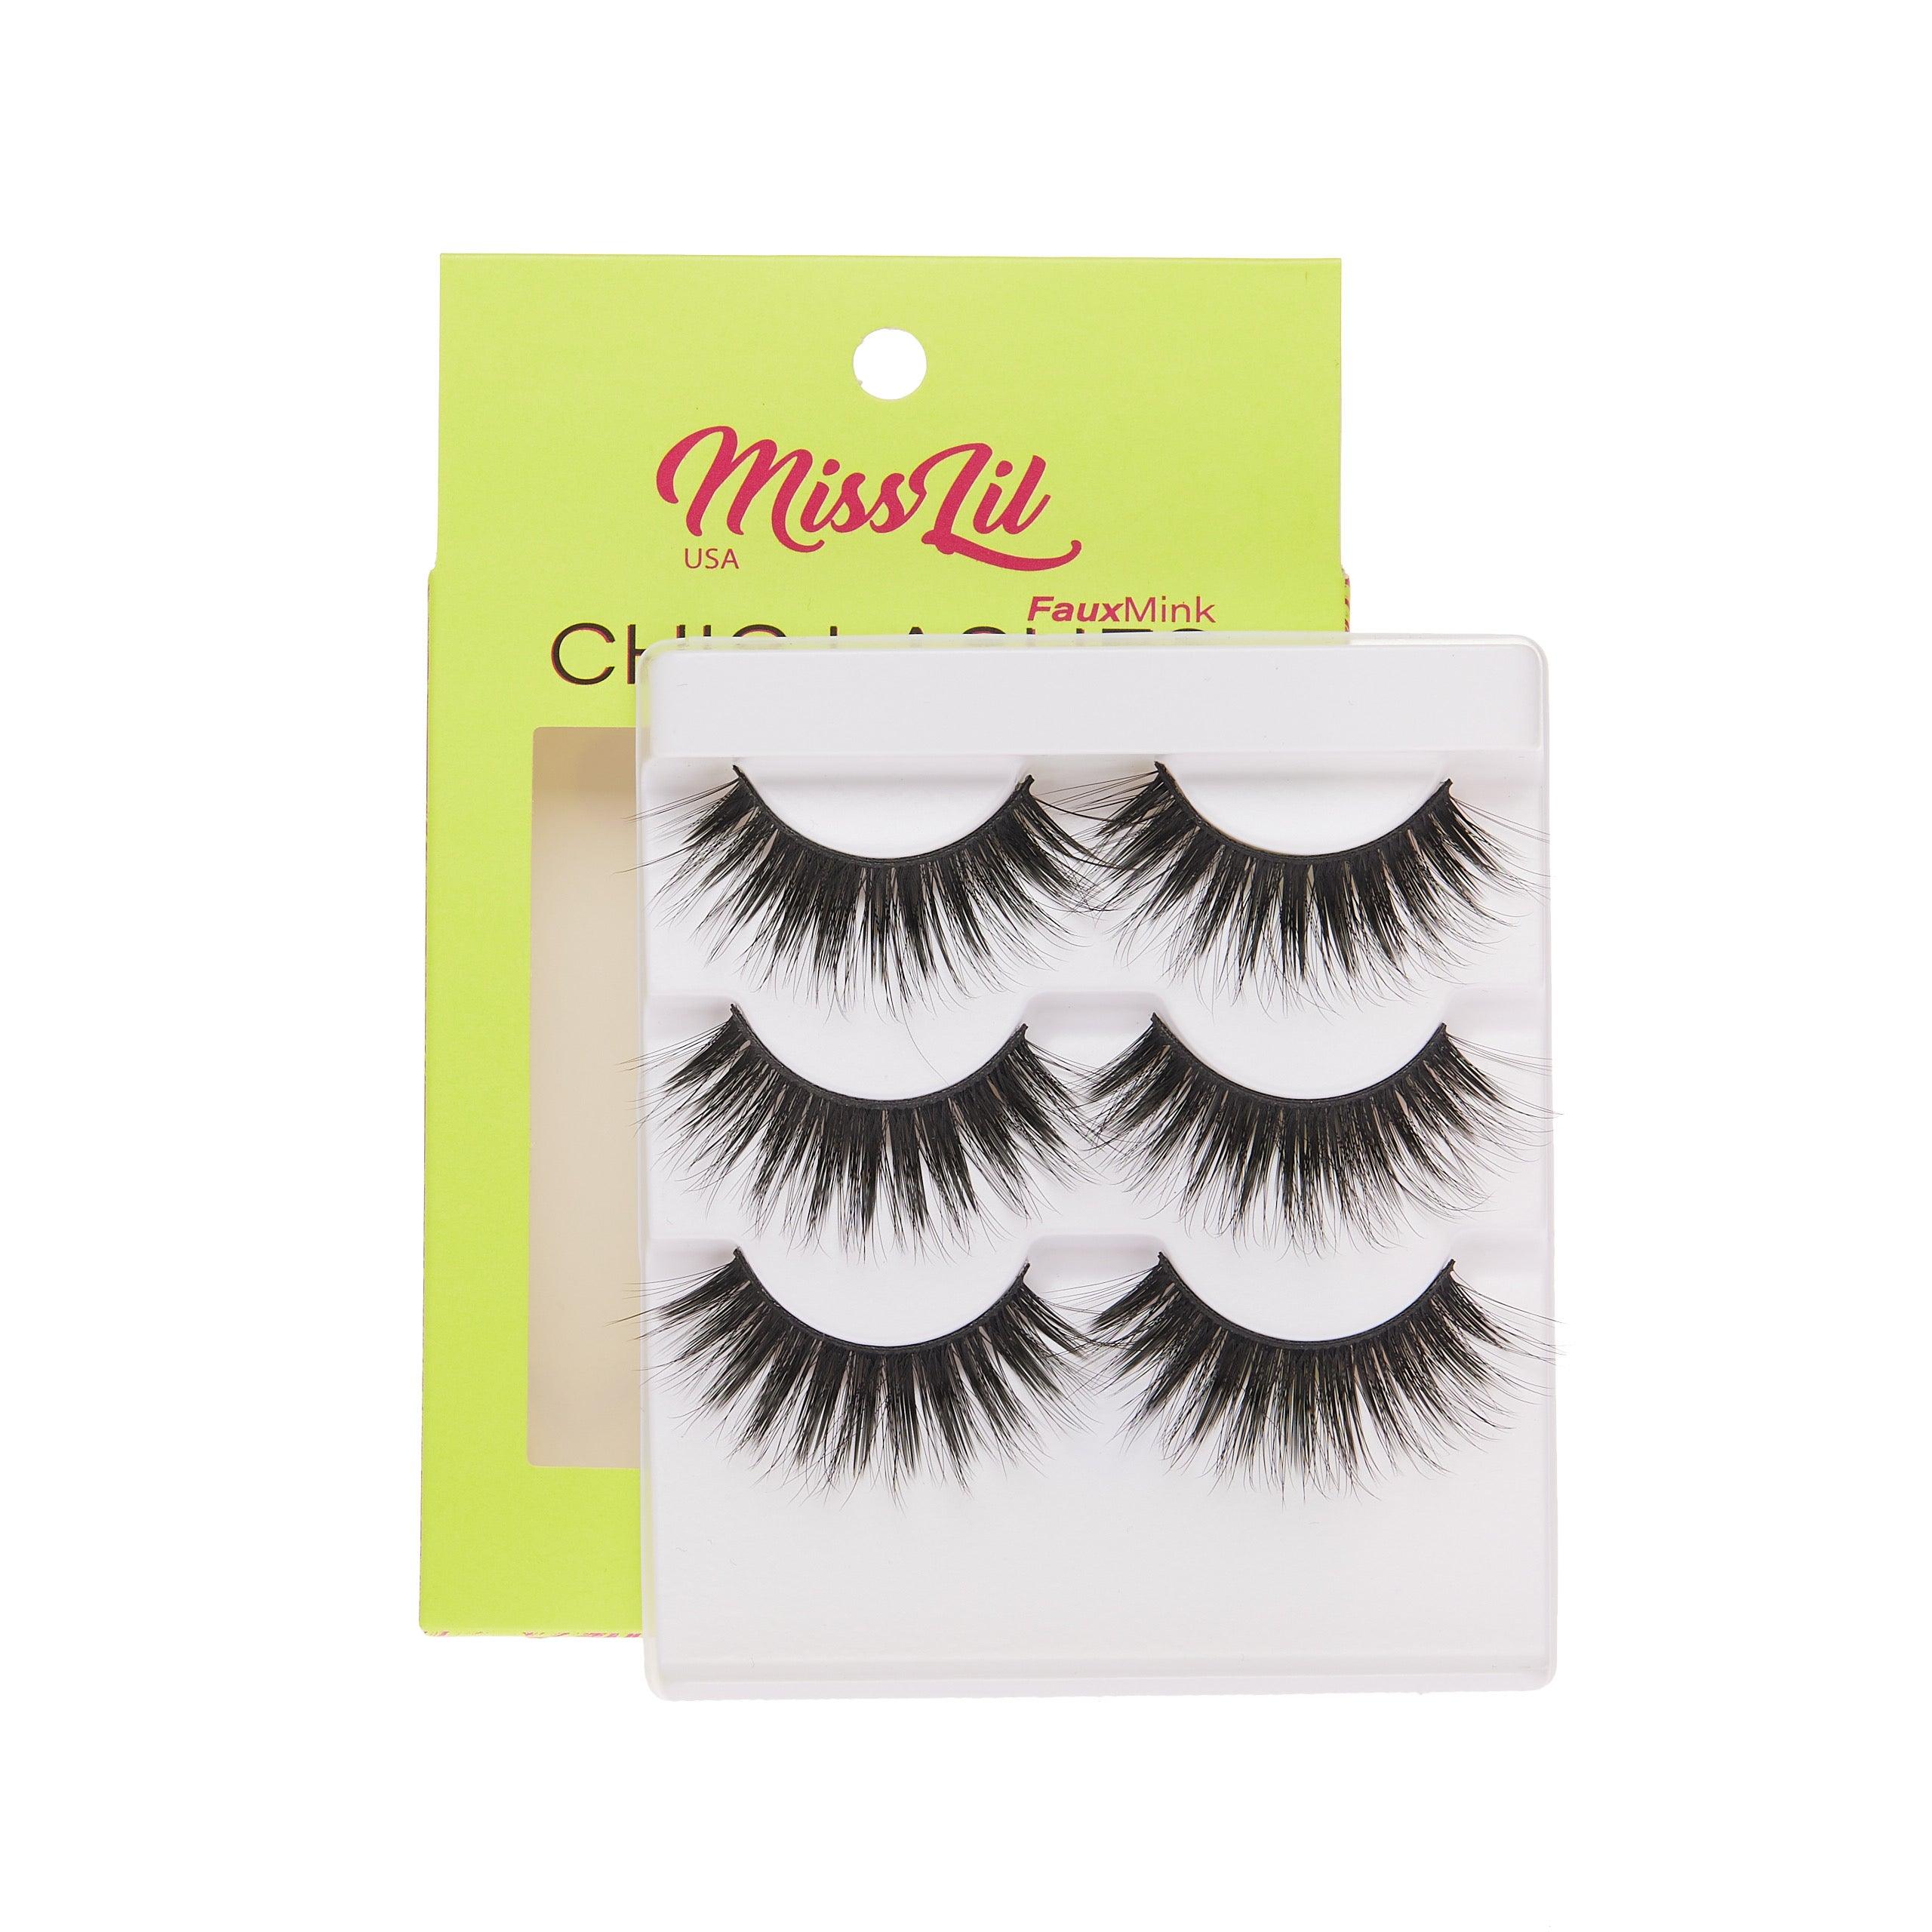 3-Pair Faux Mink Eyelashes - Chic Lashes Collection #29 - Pack of 3 - Miss Lil USA